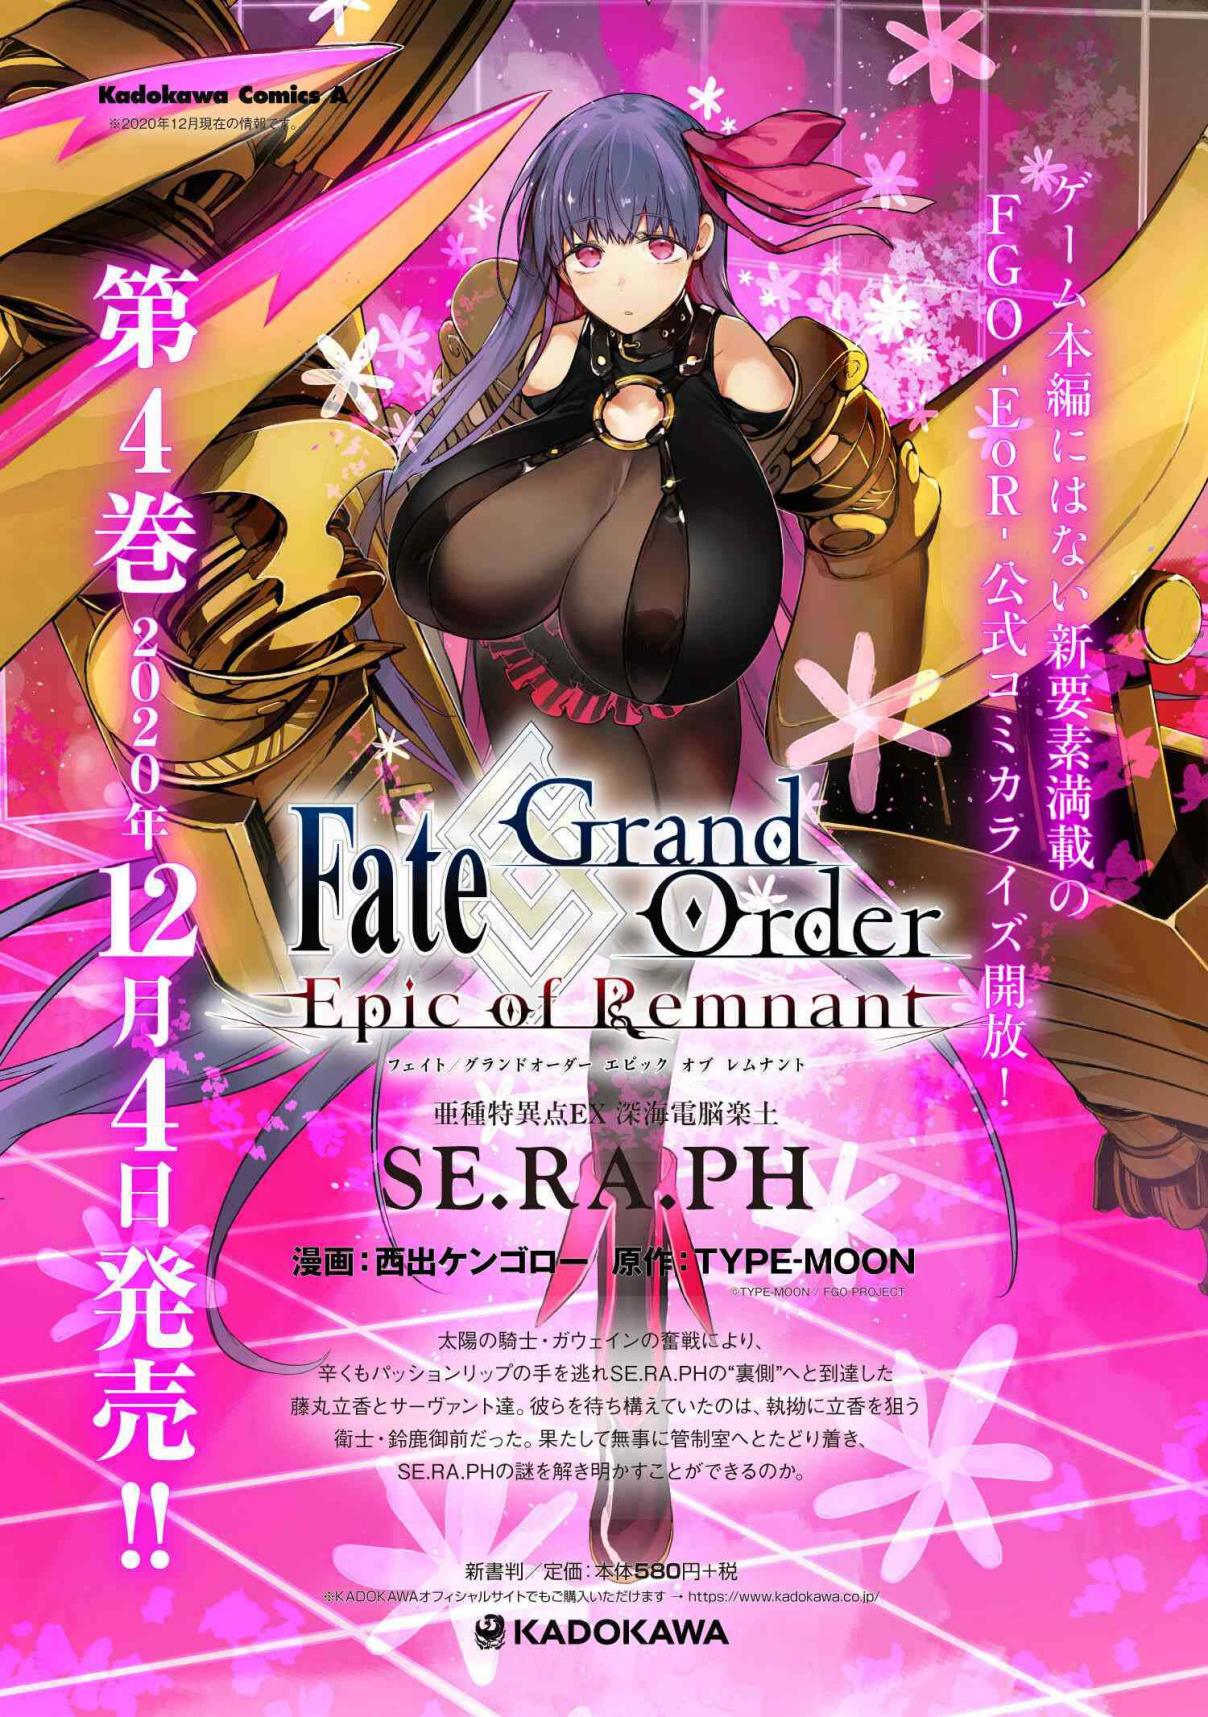 Fate/Grand Order -Epic of Remnant- Deep Sea Cyber-Paradise, SE.RA.PH 21.2